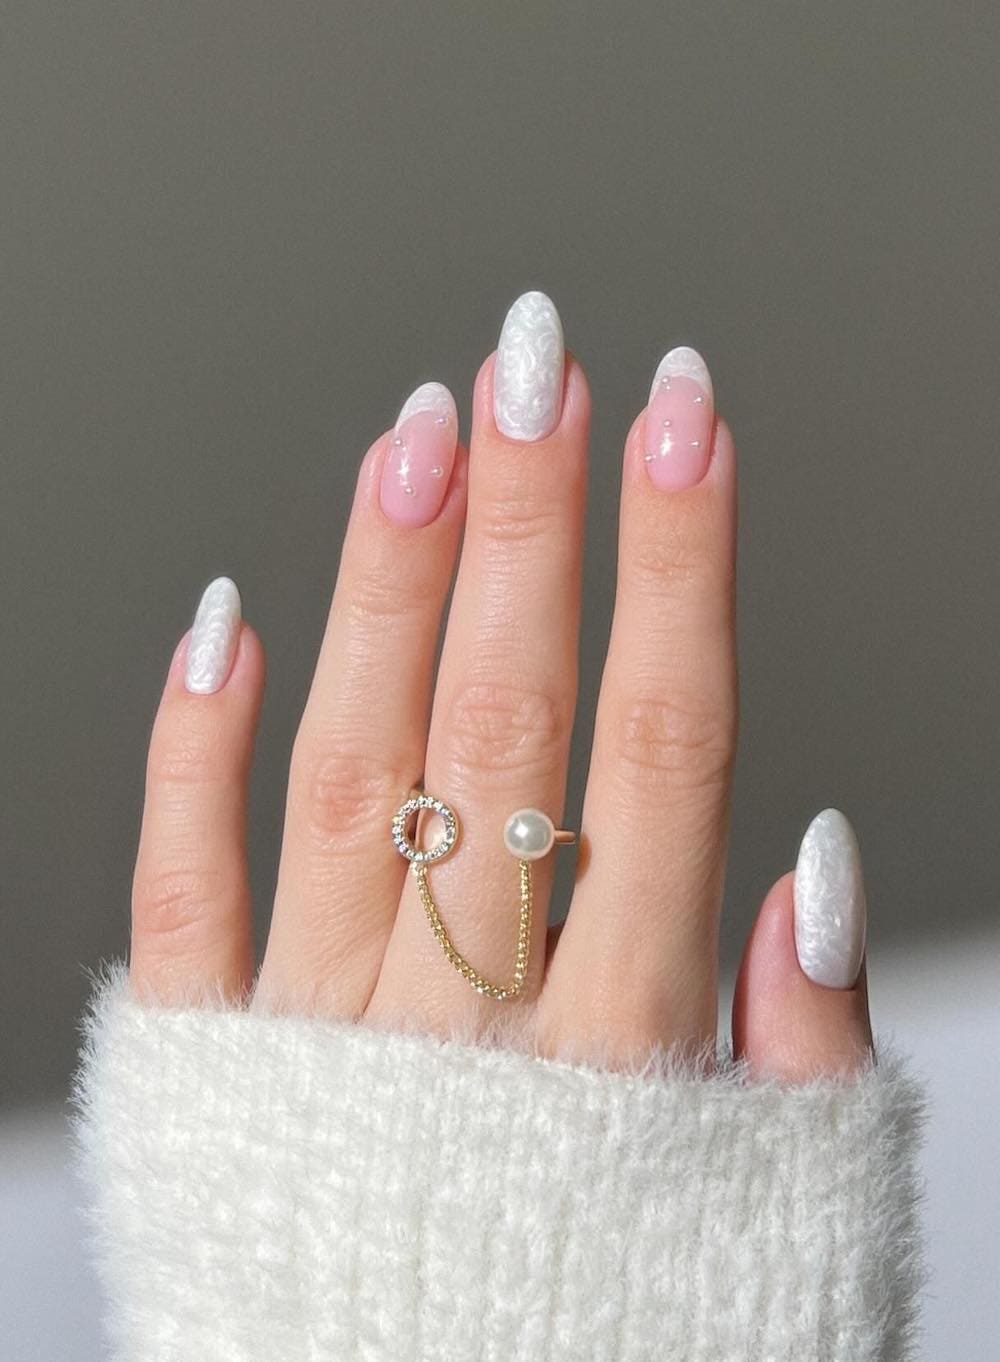 swirling white pearly nails with two french tip accent nails and pearl embellishments